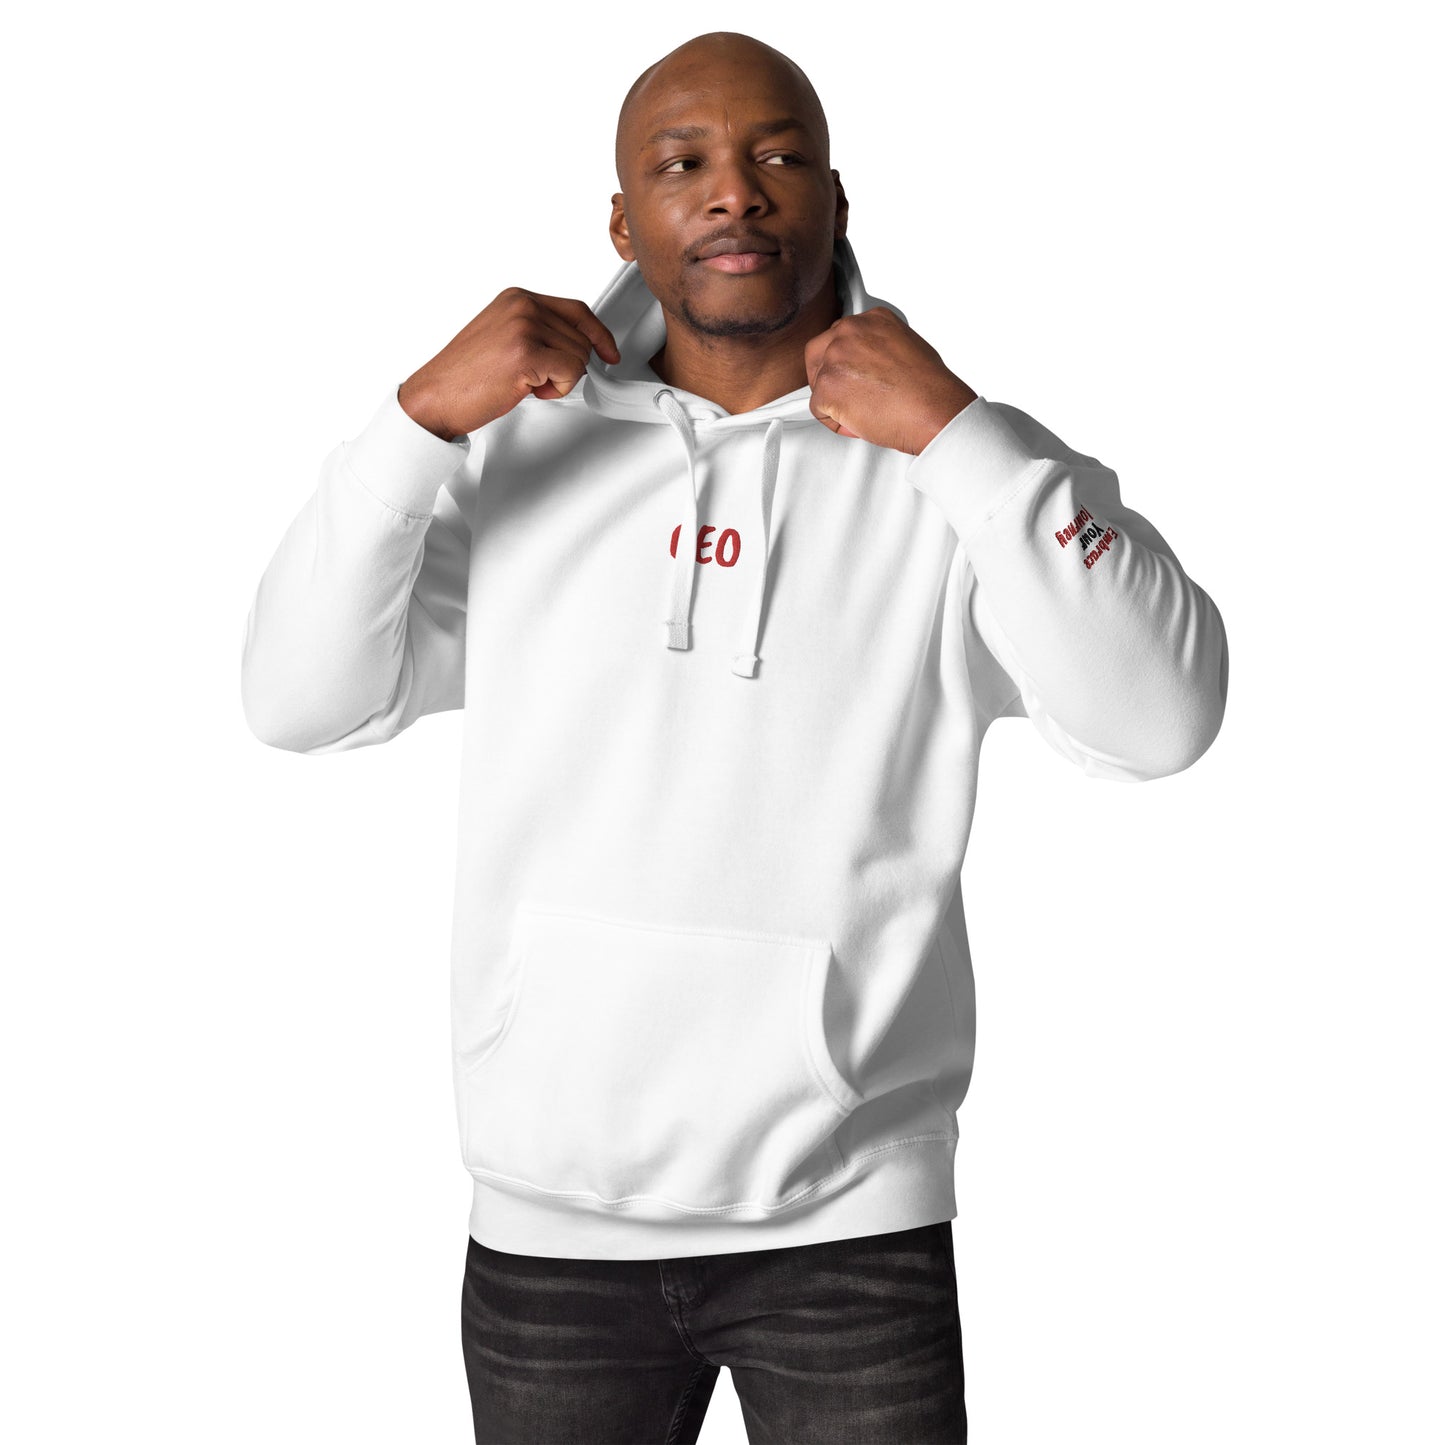 Ultimate White CEO Hoodie (Red Embroidery)